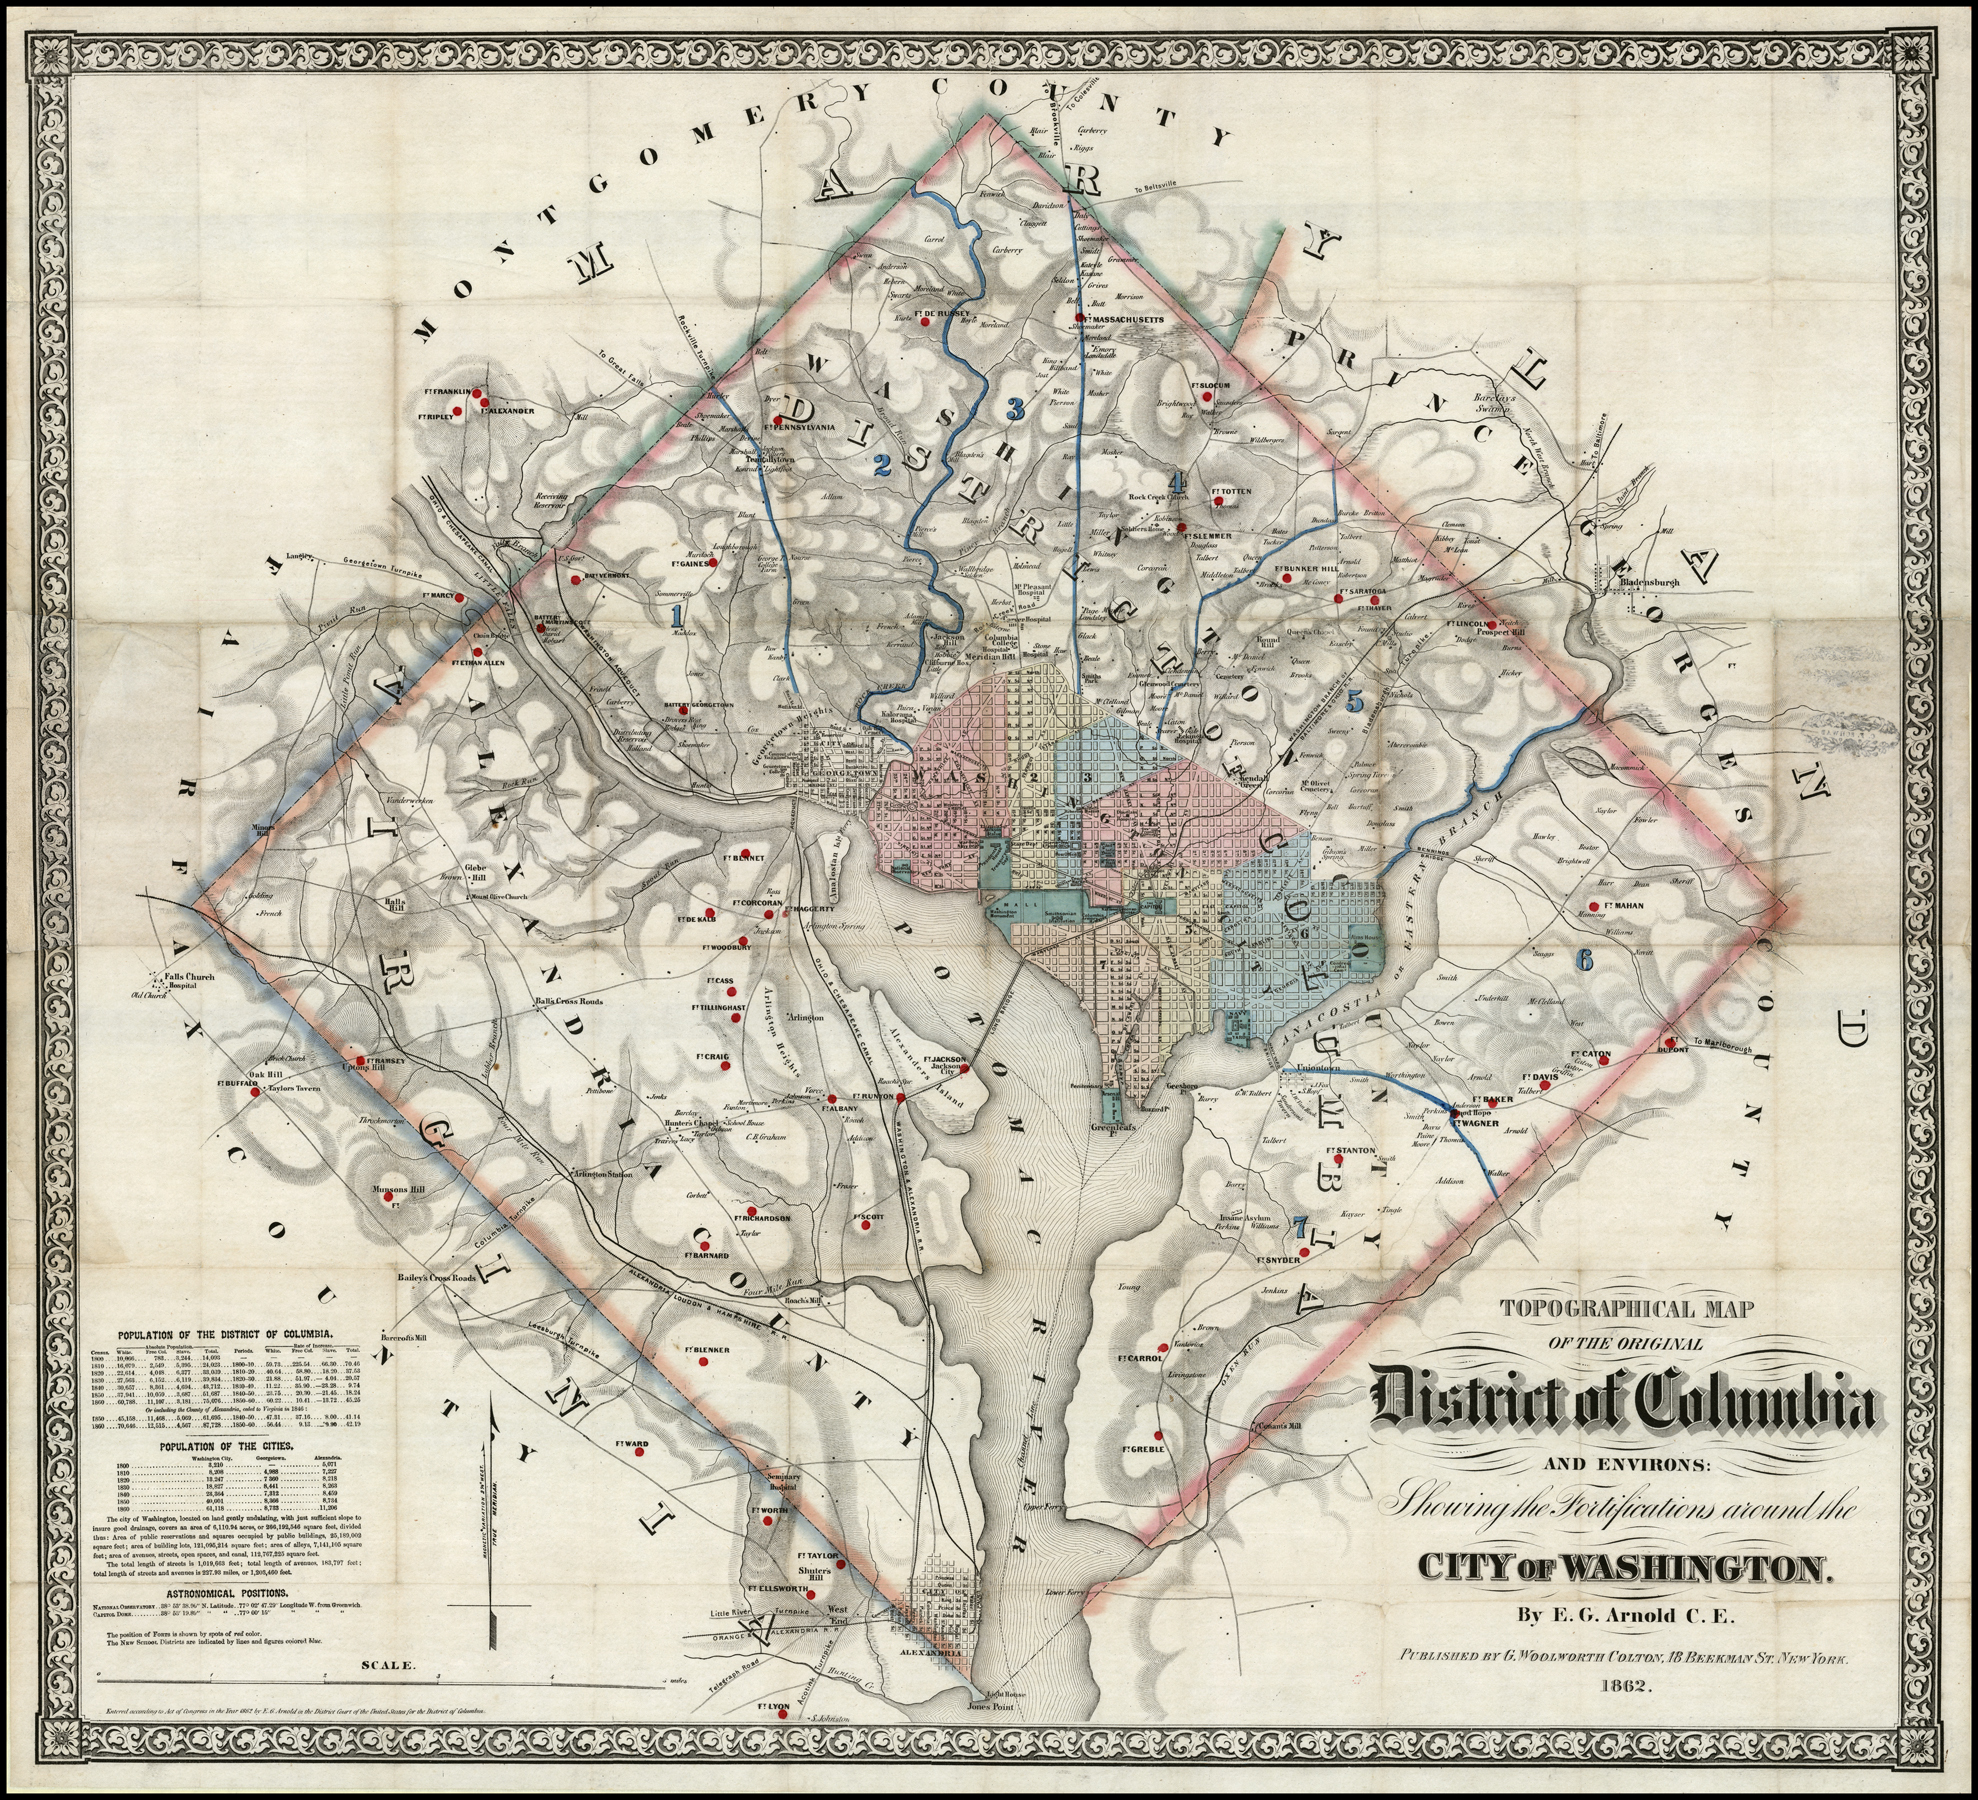 Map of the District of Columbia in 1862, showing fortifications